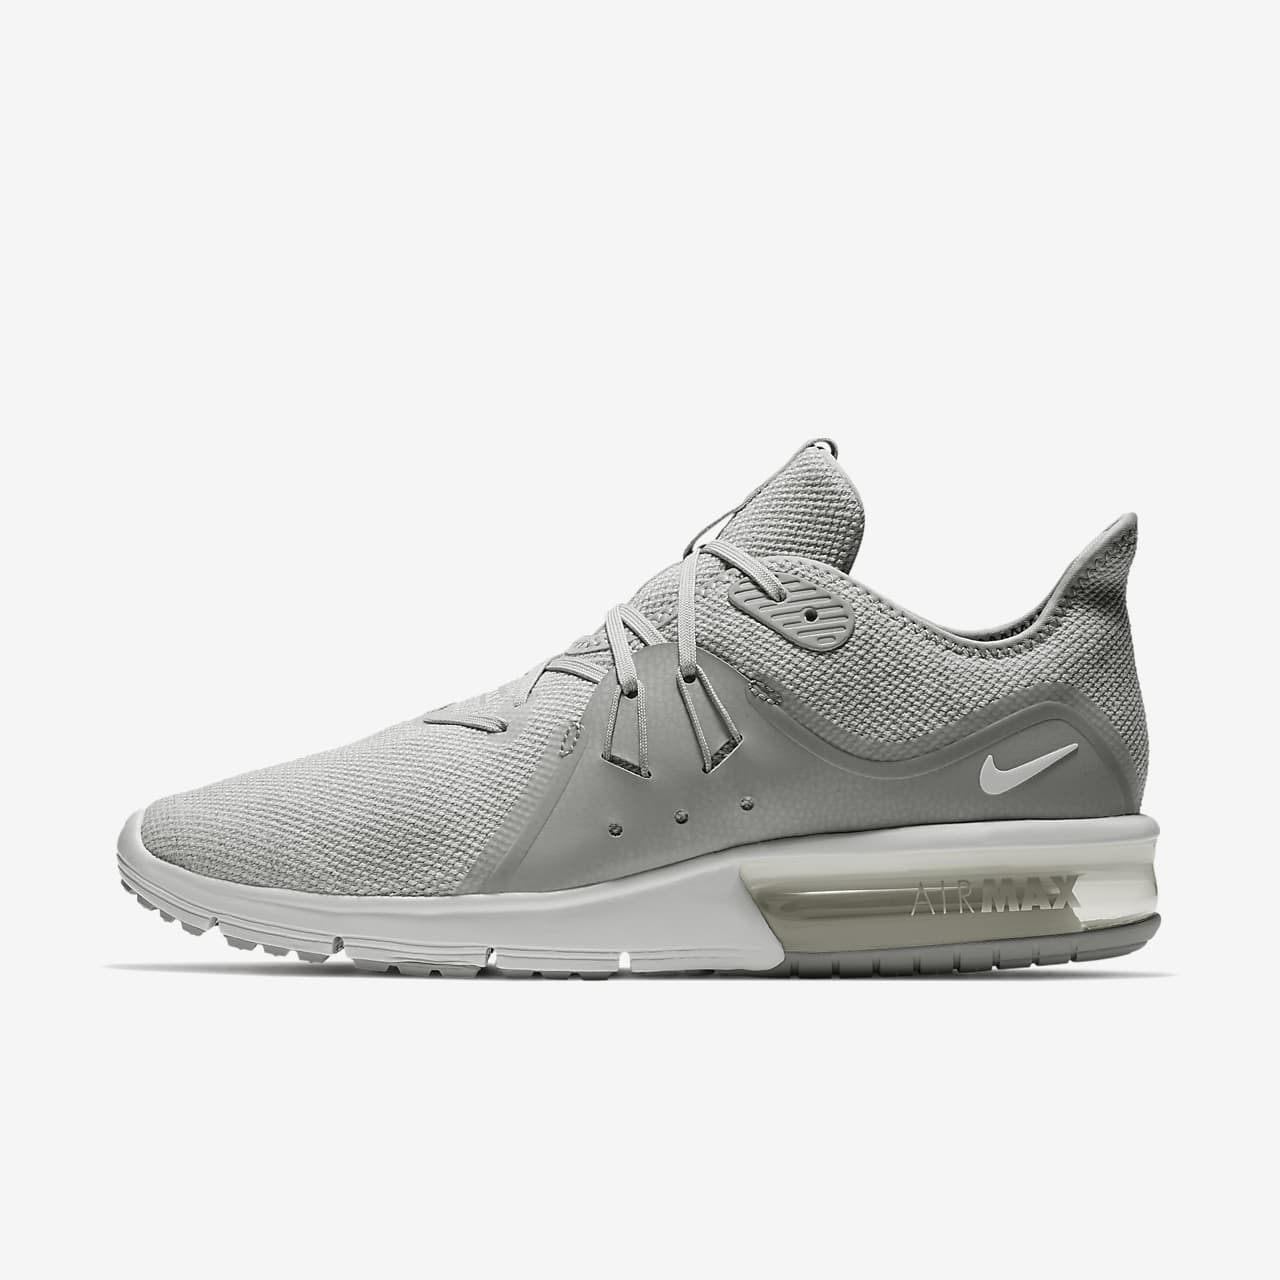 nike air max sequent 3 hot punch